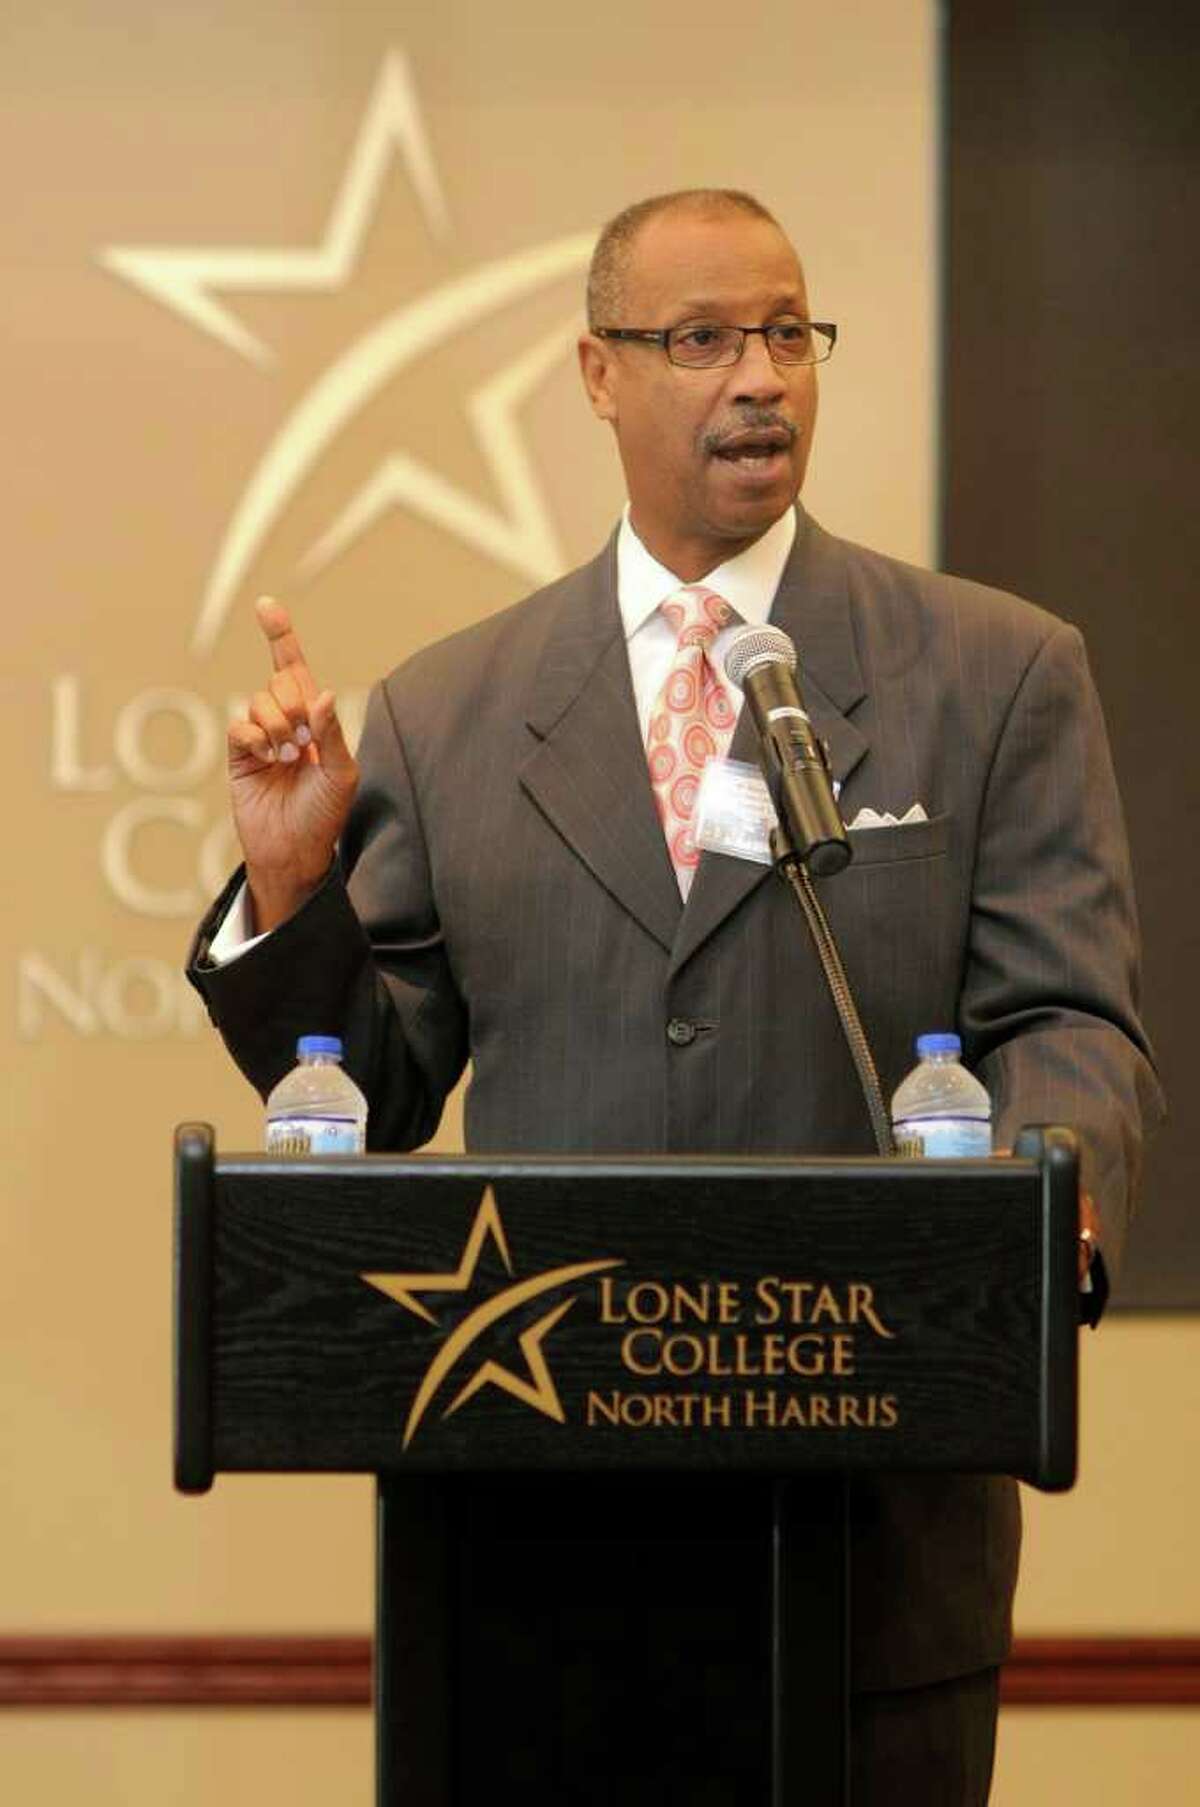 Randy Bates, Chair, LSCS Board of Trustees, makes his remarks during the opening ceremony for the Lone Star College - North Harris new Student Services Building. Freelance photo by Jerry Baker